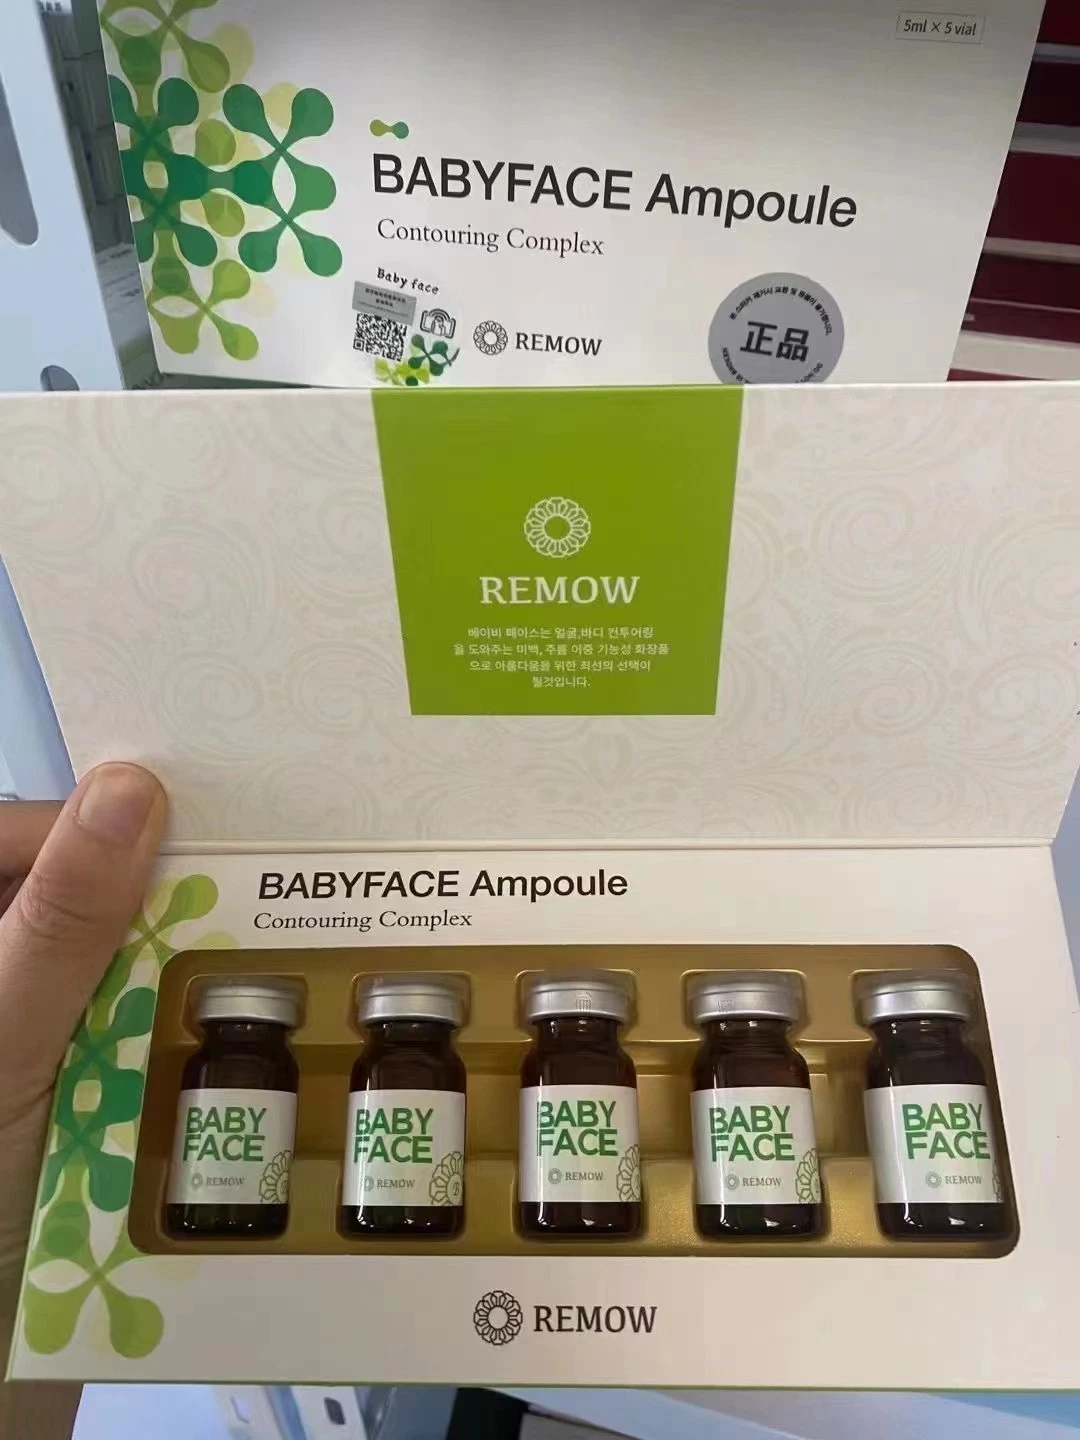 Babyface Ampoule Slimming Kabelline Slimming Body Fat Dissolving Ppc DC Solution Kybella Belkyra Lipo Lab Red Ampoules Aqualyx